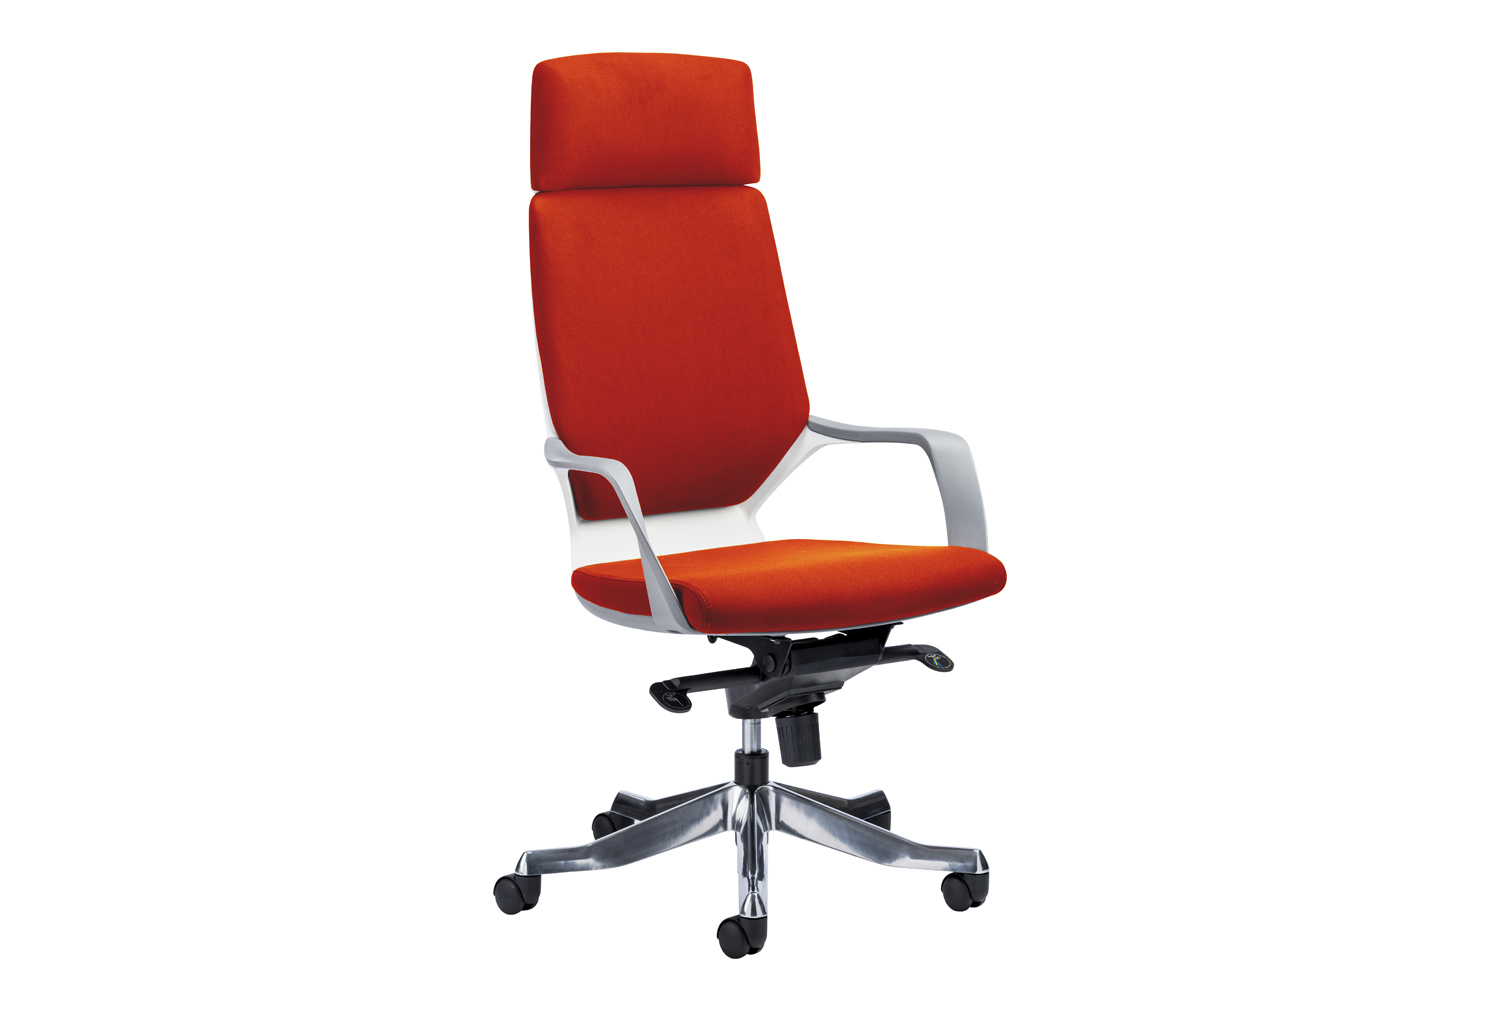 Zora High Back Fabric Executive Office Chair (Tabasco Orange), Fully Installed